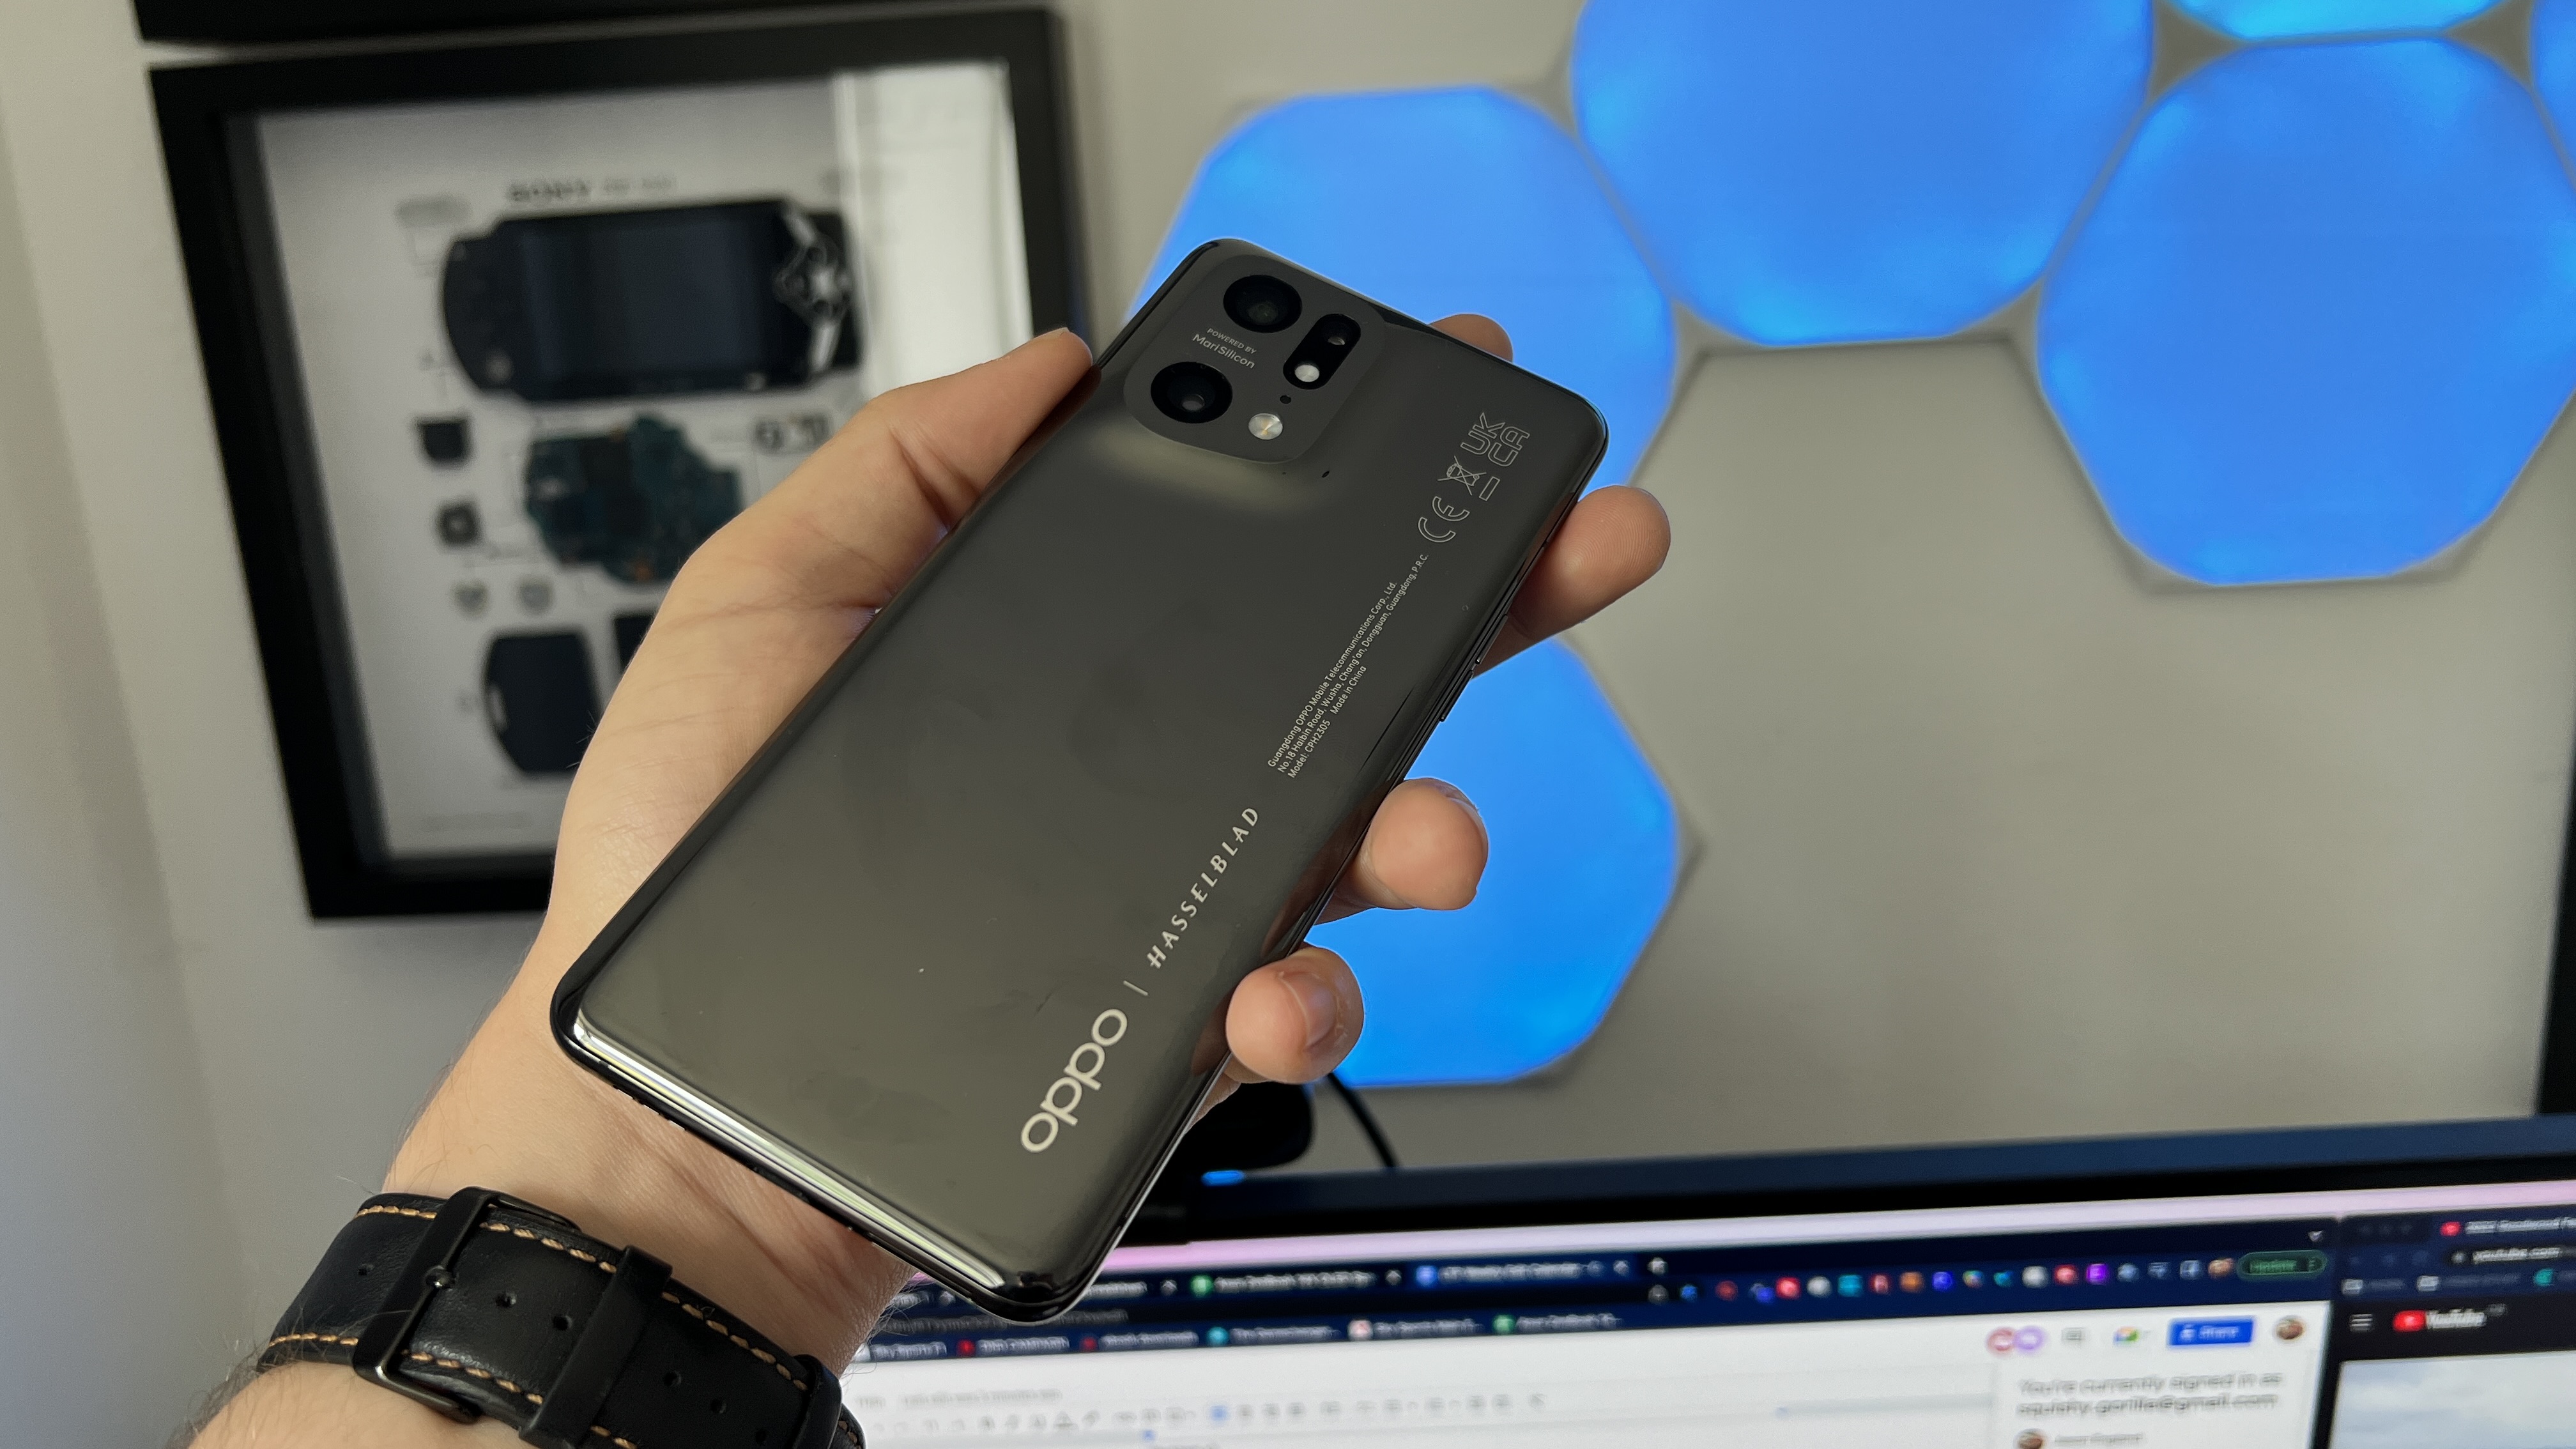 Oppo Encuentra X5 Pro